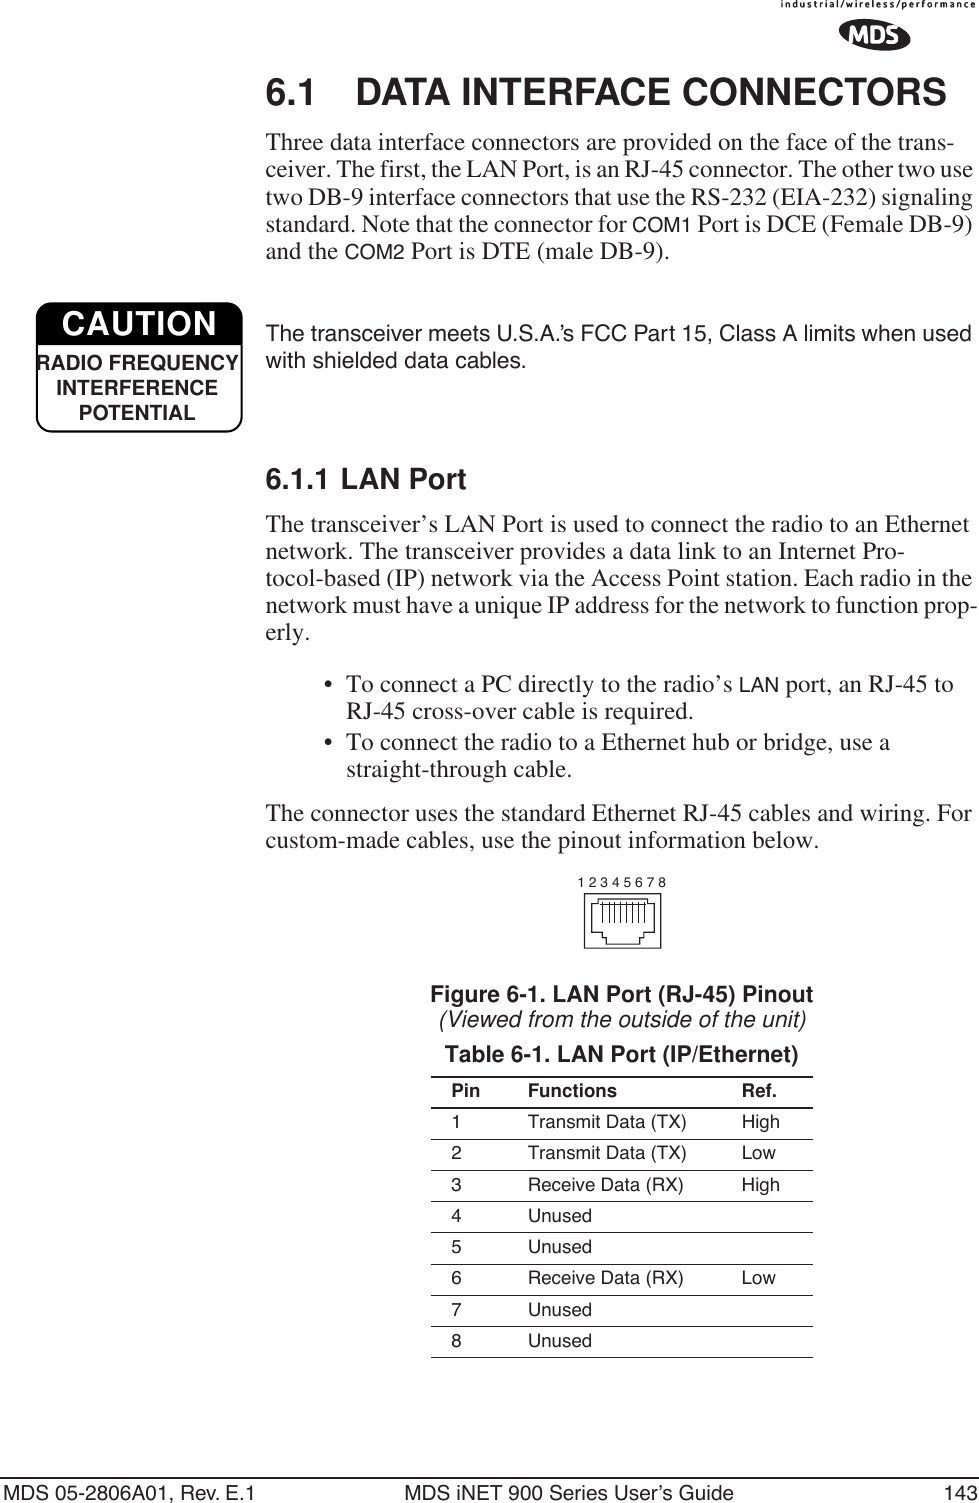 MDS 05-2806A01, Rev. E.1 MDS iNET 900 Series User’s Guide 1436.1 DATA INTERFACE CONNECTORSThree data interface connectors are provided on the face of the trans-ceiver. The first, the LAN Port, is an RJ-45 connector. The other two use two DB-9 interface connectors that use the RS-232 (EIA-232) signaling standard. Note that the connector for COM1 Port is DCE (Female DB-9) and the COM2 Port is DTE (male DB-9). The transceiver meets U.S.A.’s FCC Part 15, Class A limits when used with shielded data cables. 6.1.1 LAN PortThe transceiver’s LAN Port is used to connect the radio to an Ethernet network. The transceiver provides a data link to an Internet Pro-tocol-based (IP) network via the Access Point station. Each radio in the network must have a unique IP address for the network to function prop-erly.• To connect a PC directly to the radio’s LAN port, an RJ-45 to RJ-45 cross-over cable is required. • To connect the radio to a Ethernet hub or bridge, use a straight-through cable.The connector uses the standard Ethernet RJ-45 cables and wiring. For custom-made cables, use the pinout information below.Figure 6-1. LAN Port (RJ-45) Pinout(Viewed from the outside of the unit) Table 6-1. LAN Port (IP/Ethernet)Pin Functions Ref.1 Transmit Data (TX) High2 Transmit Data (TX) Low3 Receive Data (RX) High4 Unused5 Unused6 Receive Data (RX) Low7 Unused8 UnusedCAUTIONRADIO FREQUENCYINTERFERENCE POTENTIAL1 2 3 4 5 6 7 8